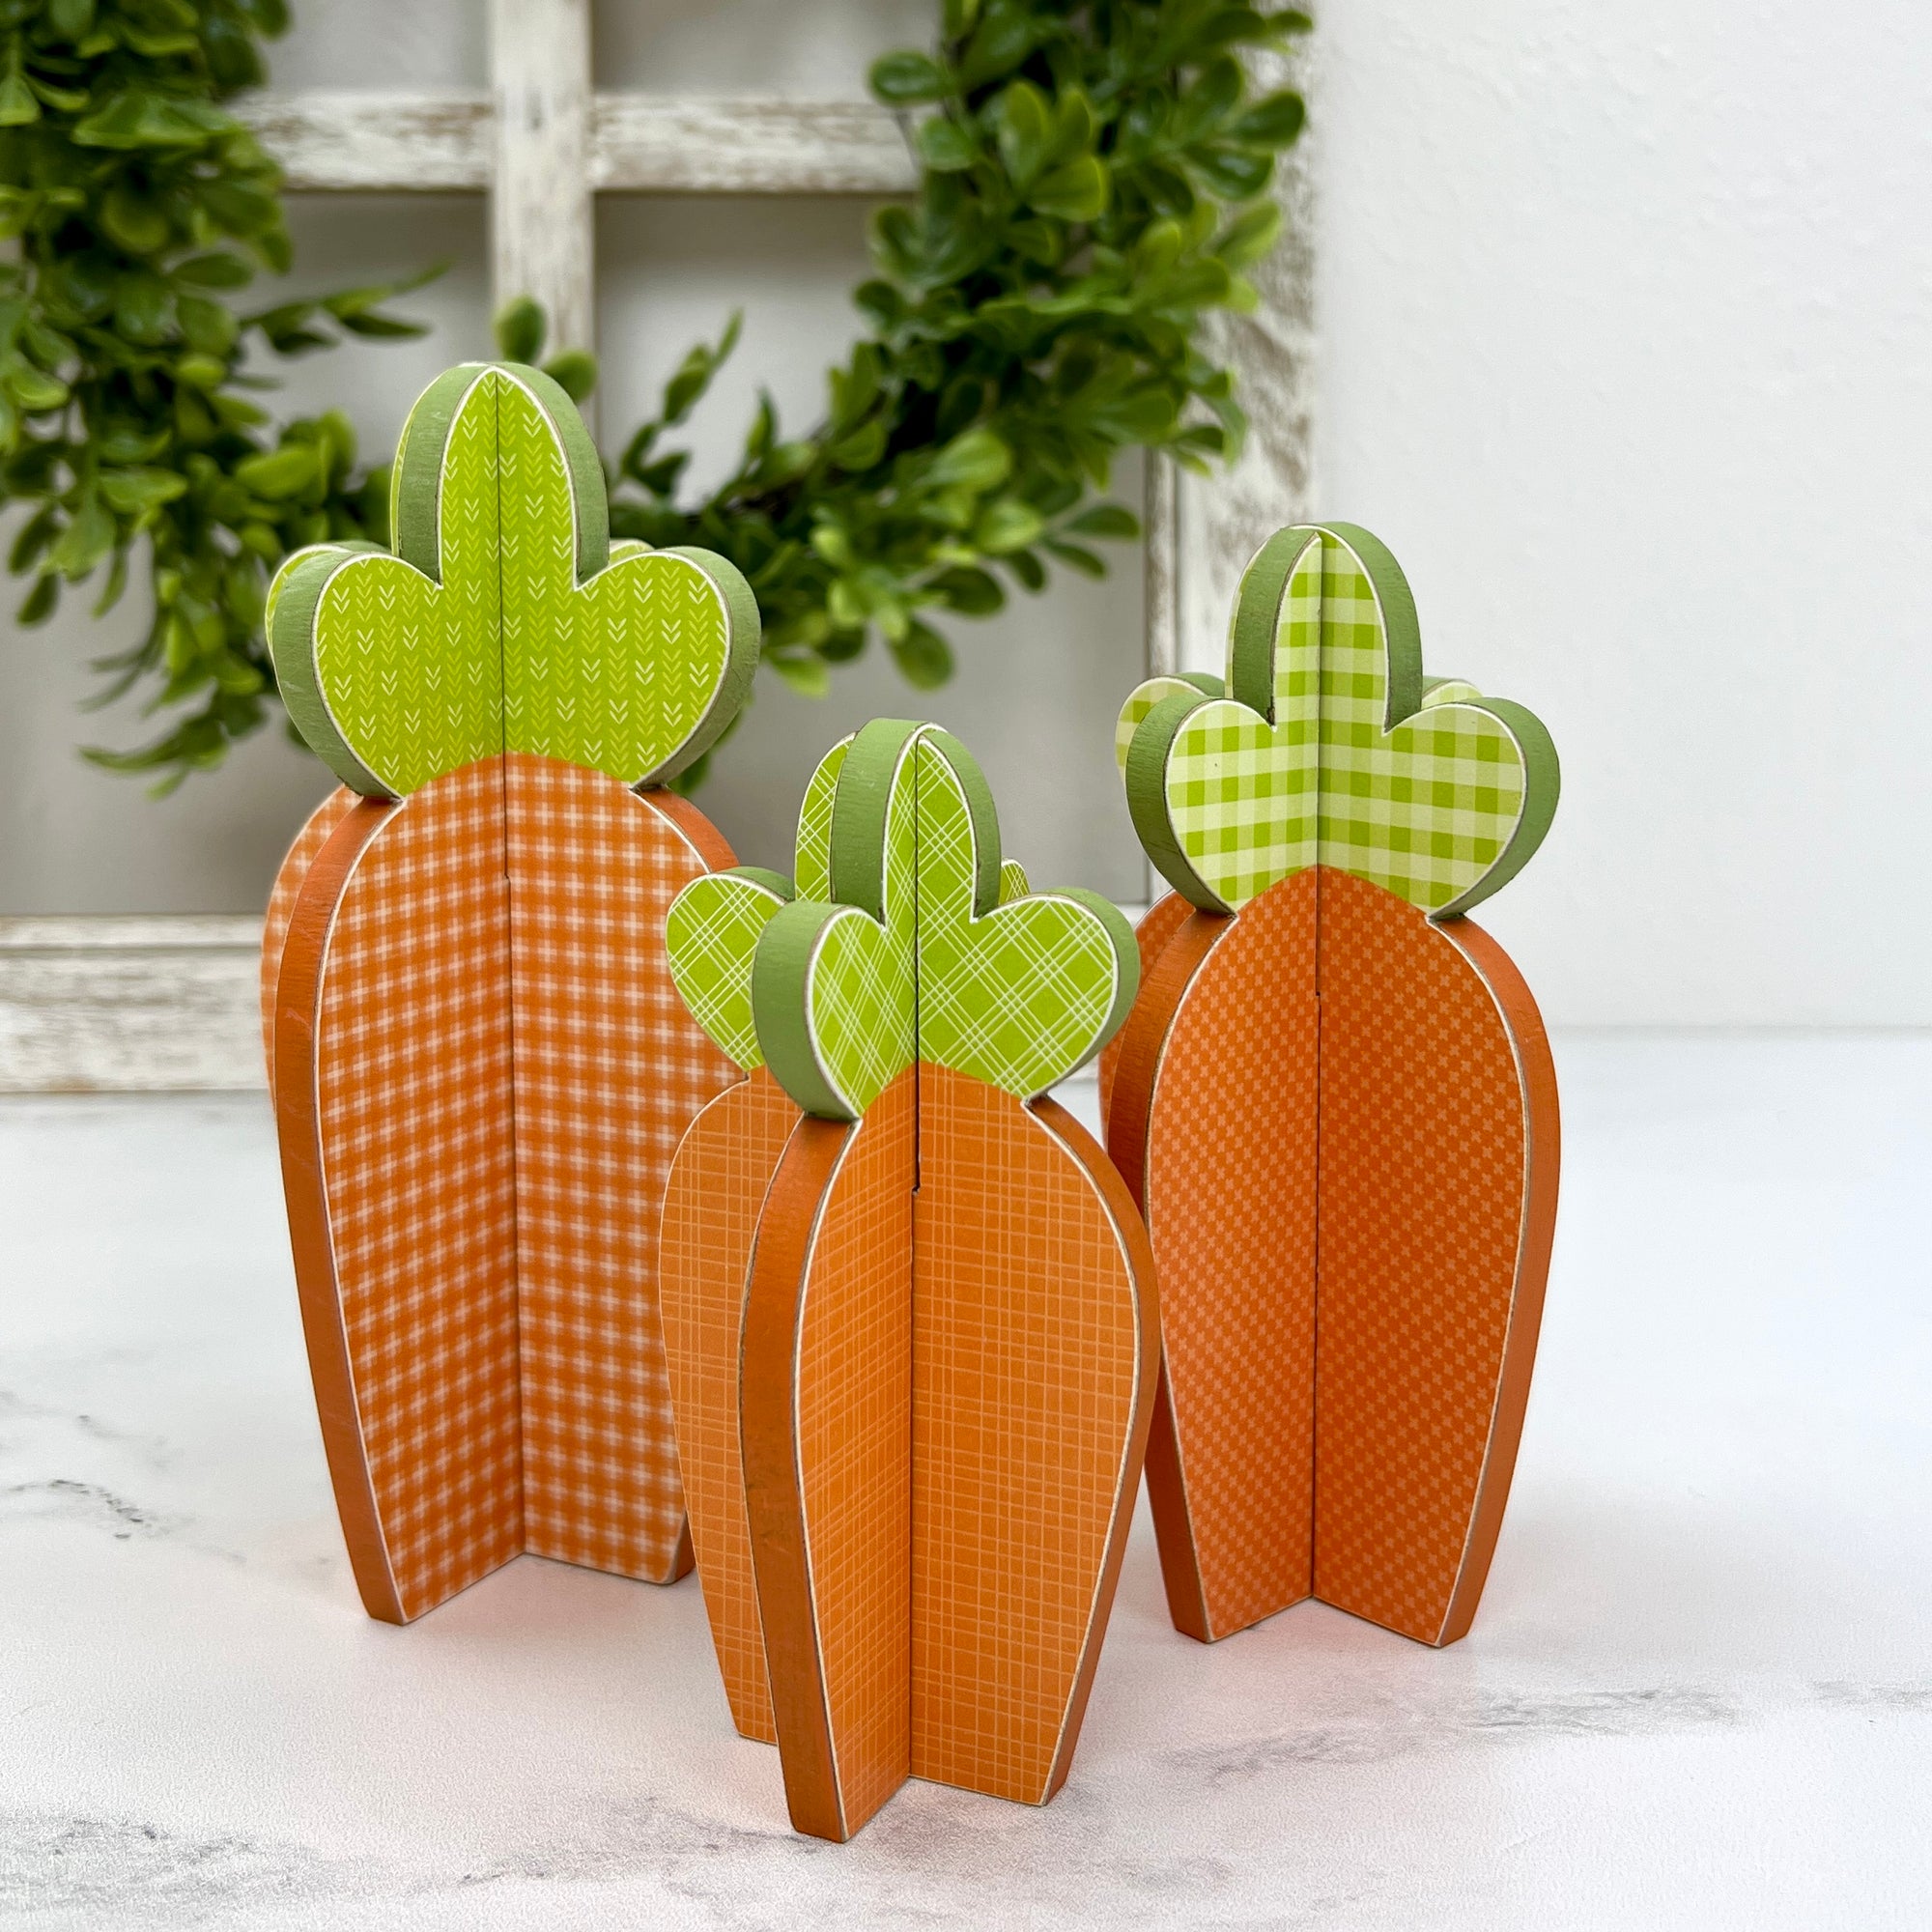 3D wood carrots DIY craft kit with orange and green paper for decoupage